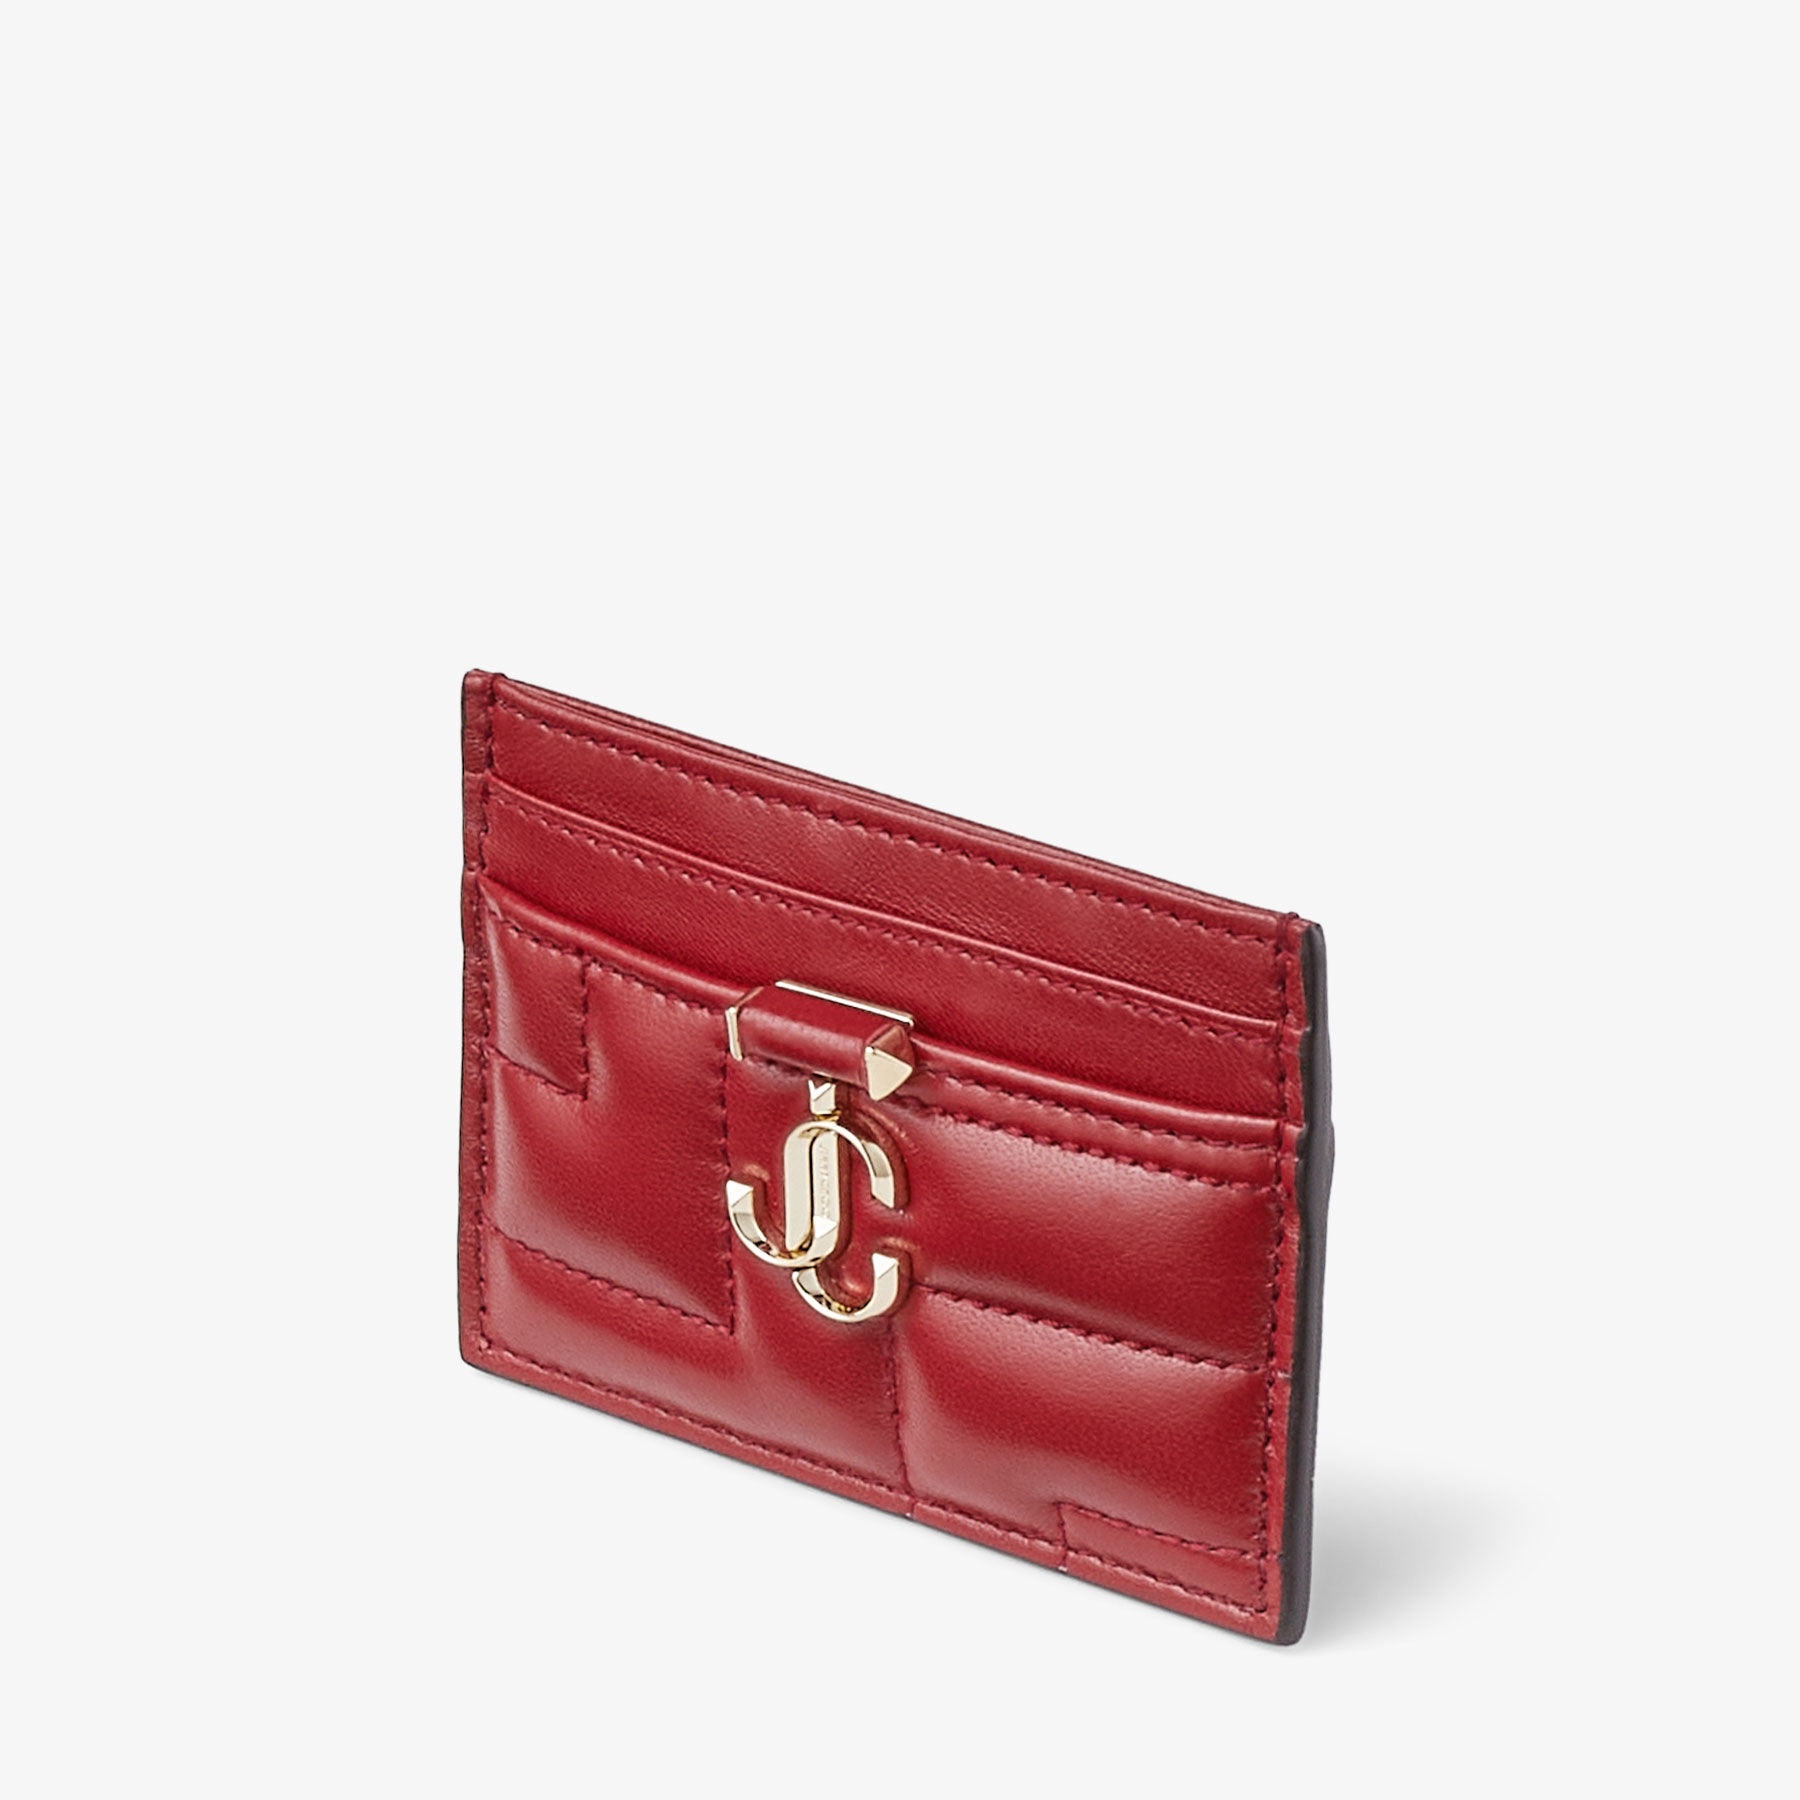 Umika
Cranberry Quilted Nappa Leather Card Holder with JC Emblem - 2